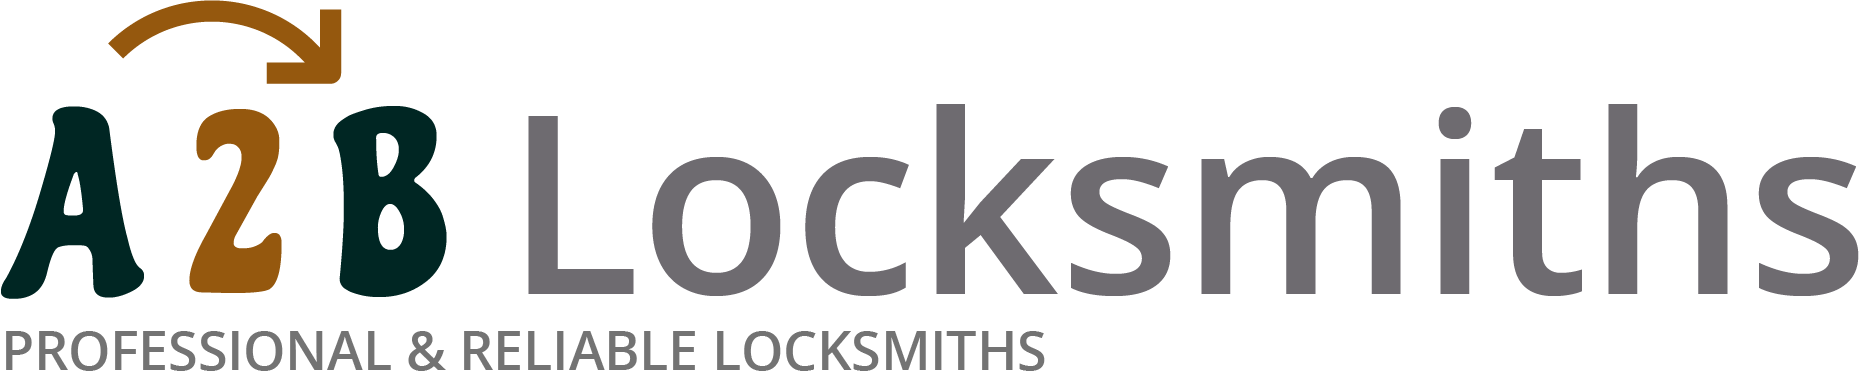 If you are locked out of house in Kirkburton, our 24/7 local emergency locksmith services can help you.